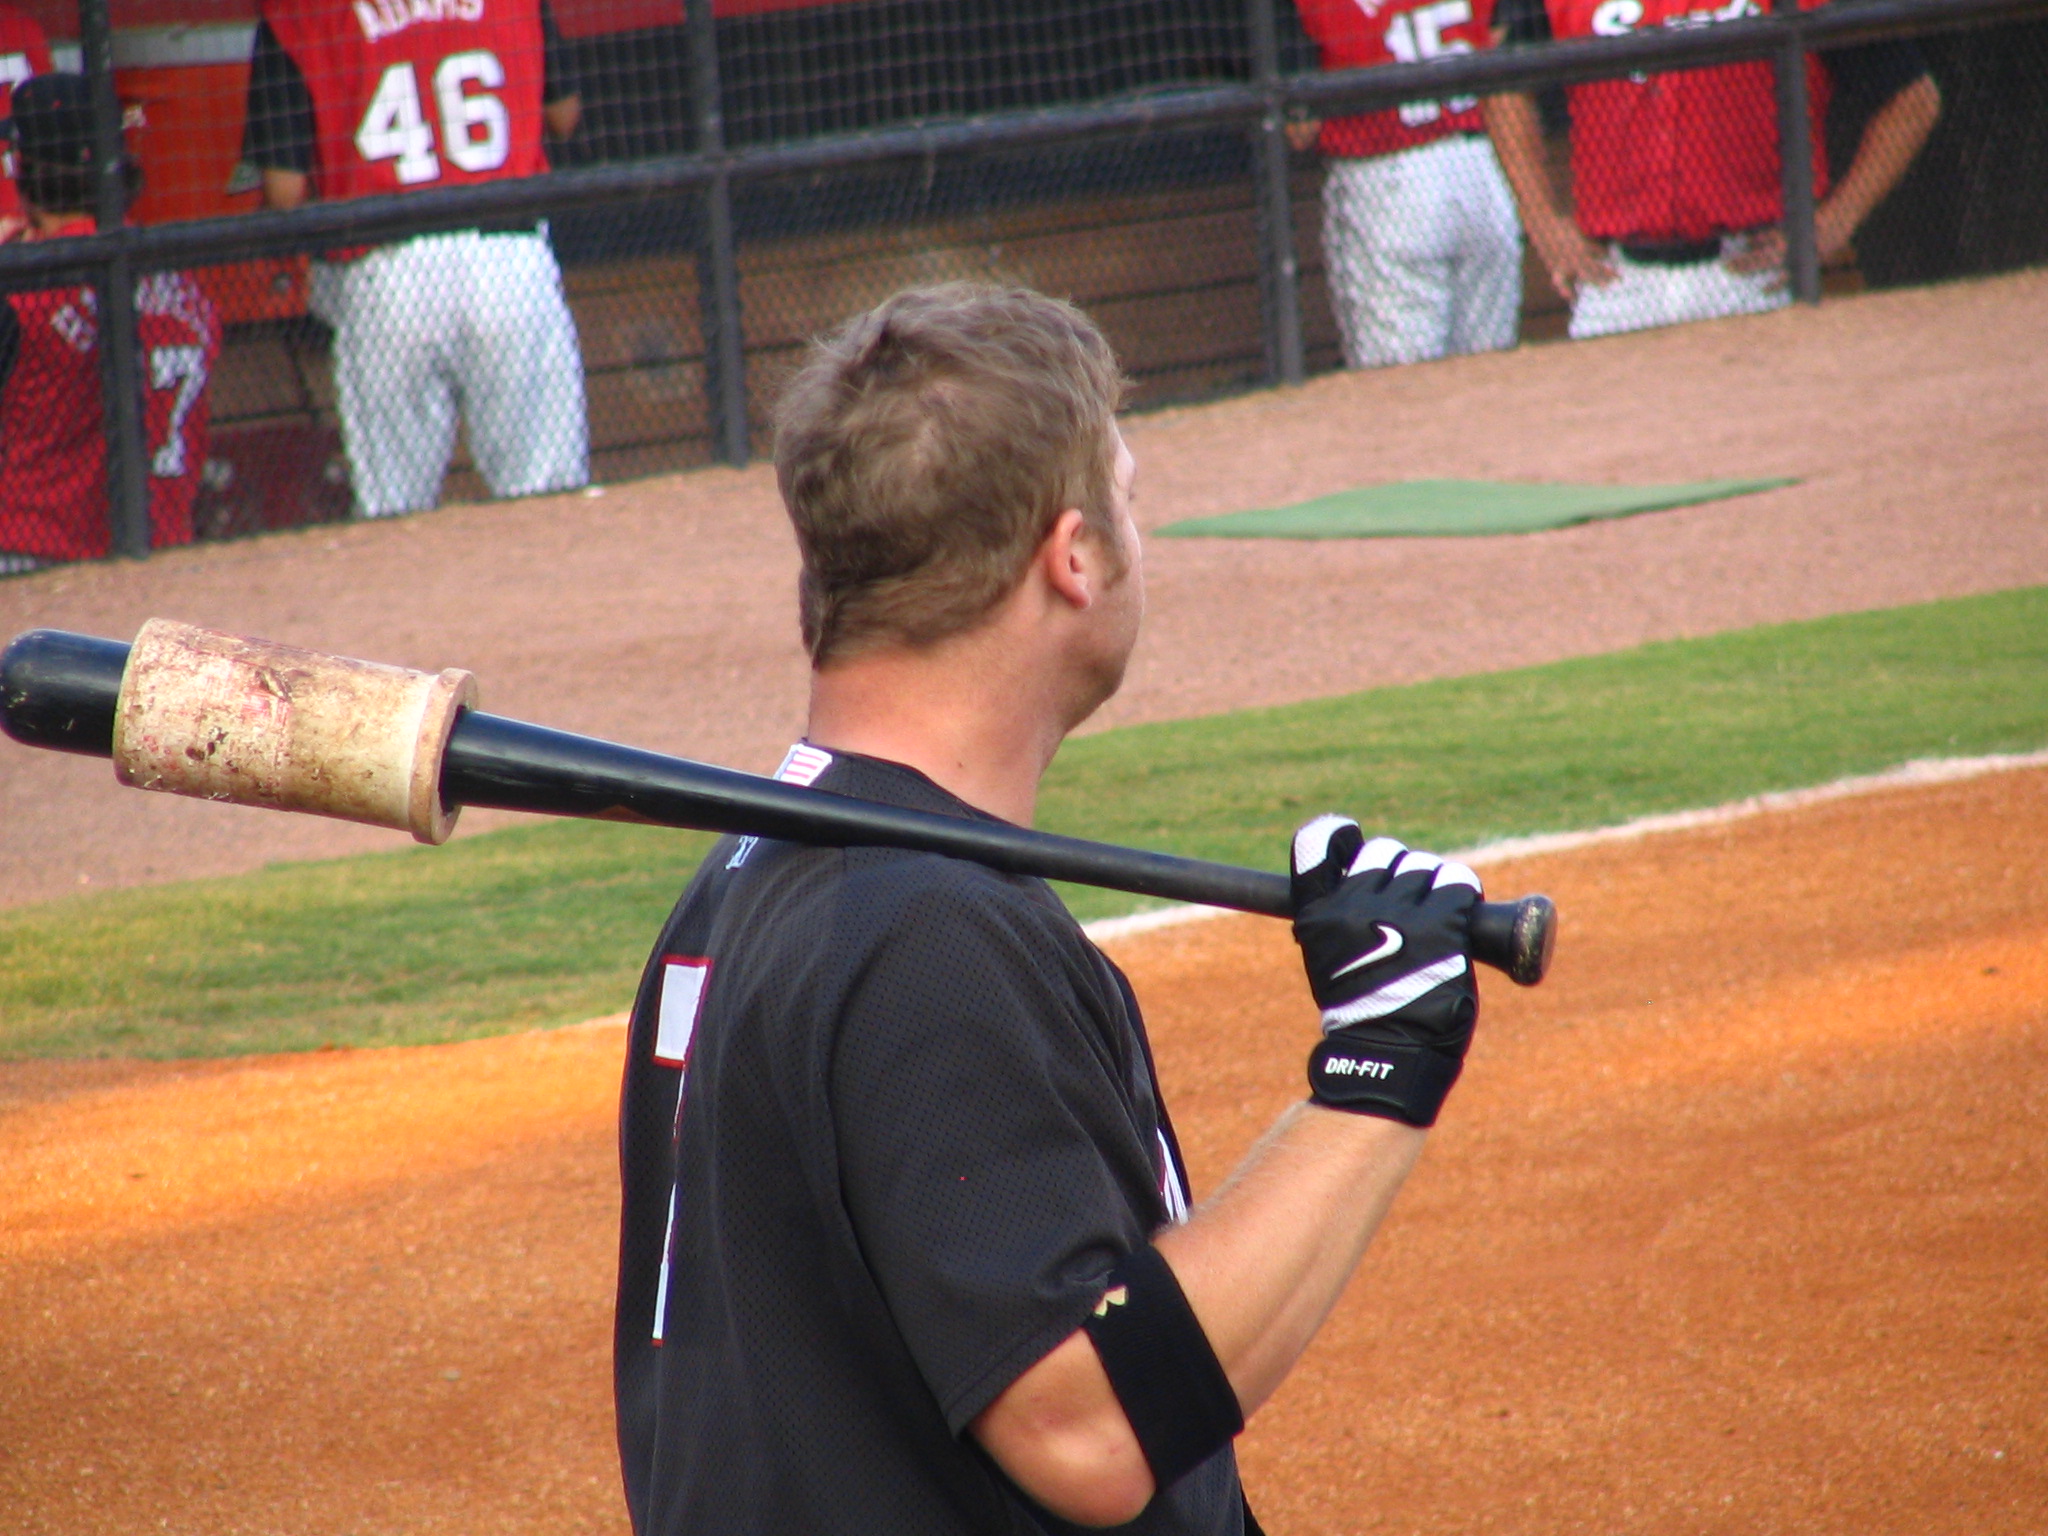 there is a baseball player standing with his bat on his shoulder